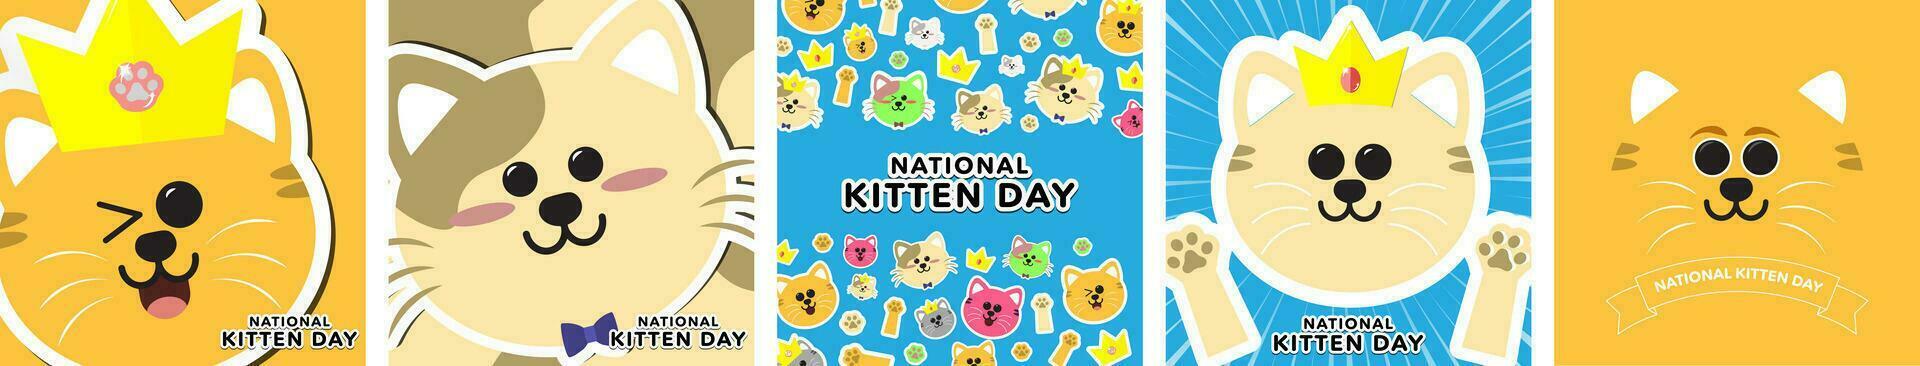 Cute National Kitten Day Greeting Cards. Cartoon cat and kitten illustrations with crowns and bowtie. Vector Illustration. EPS 10.